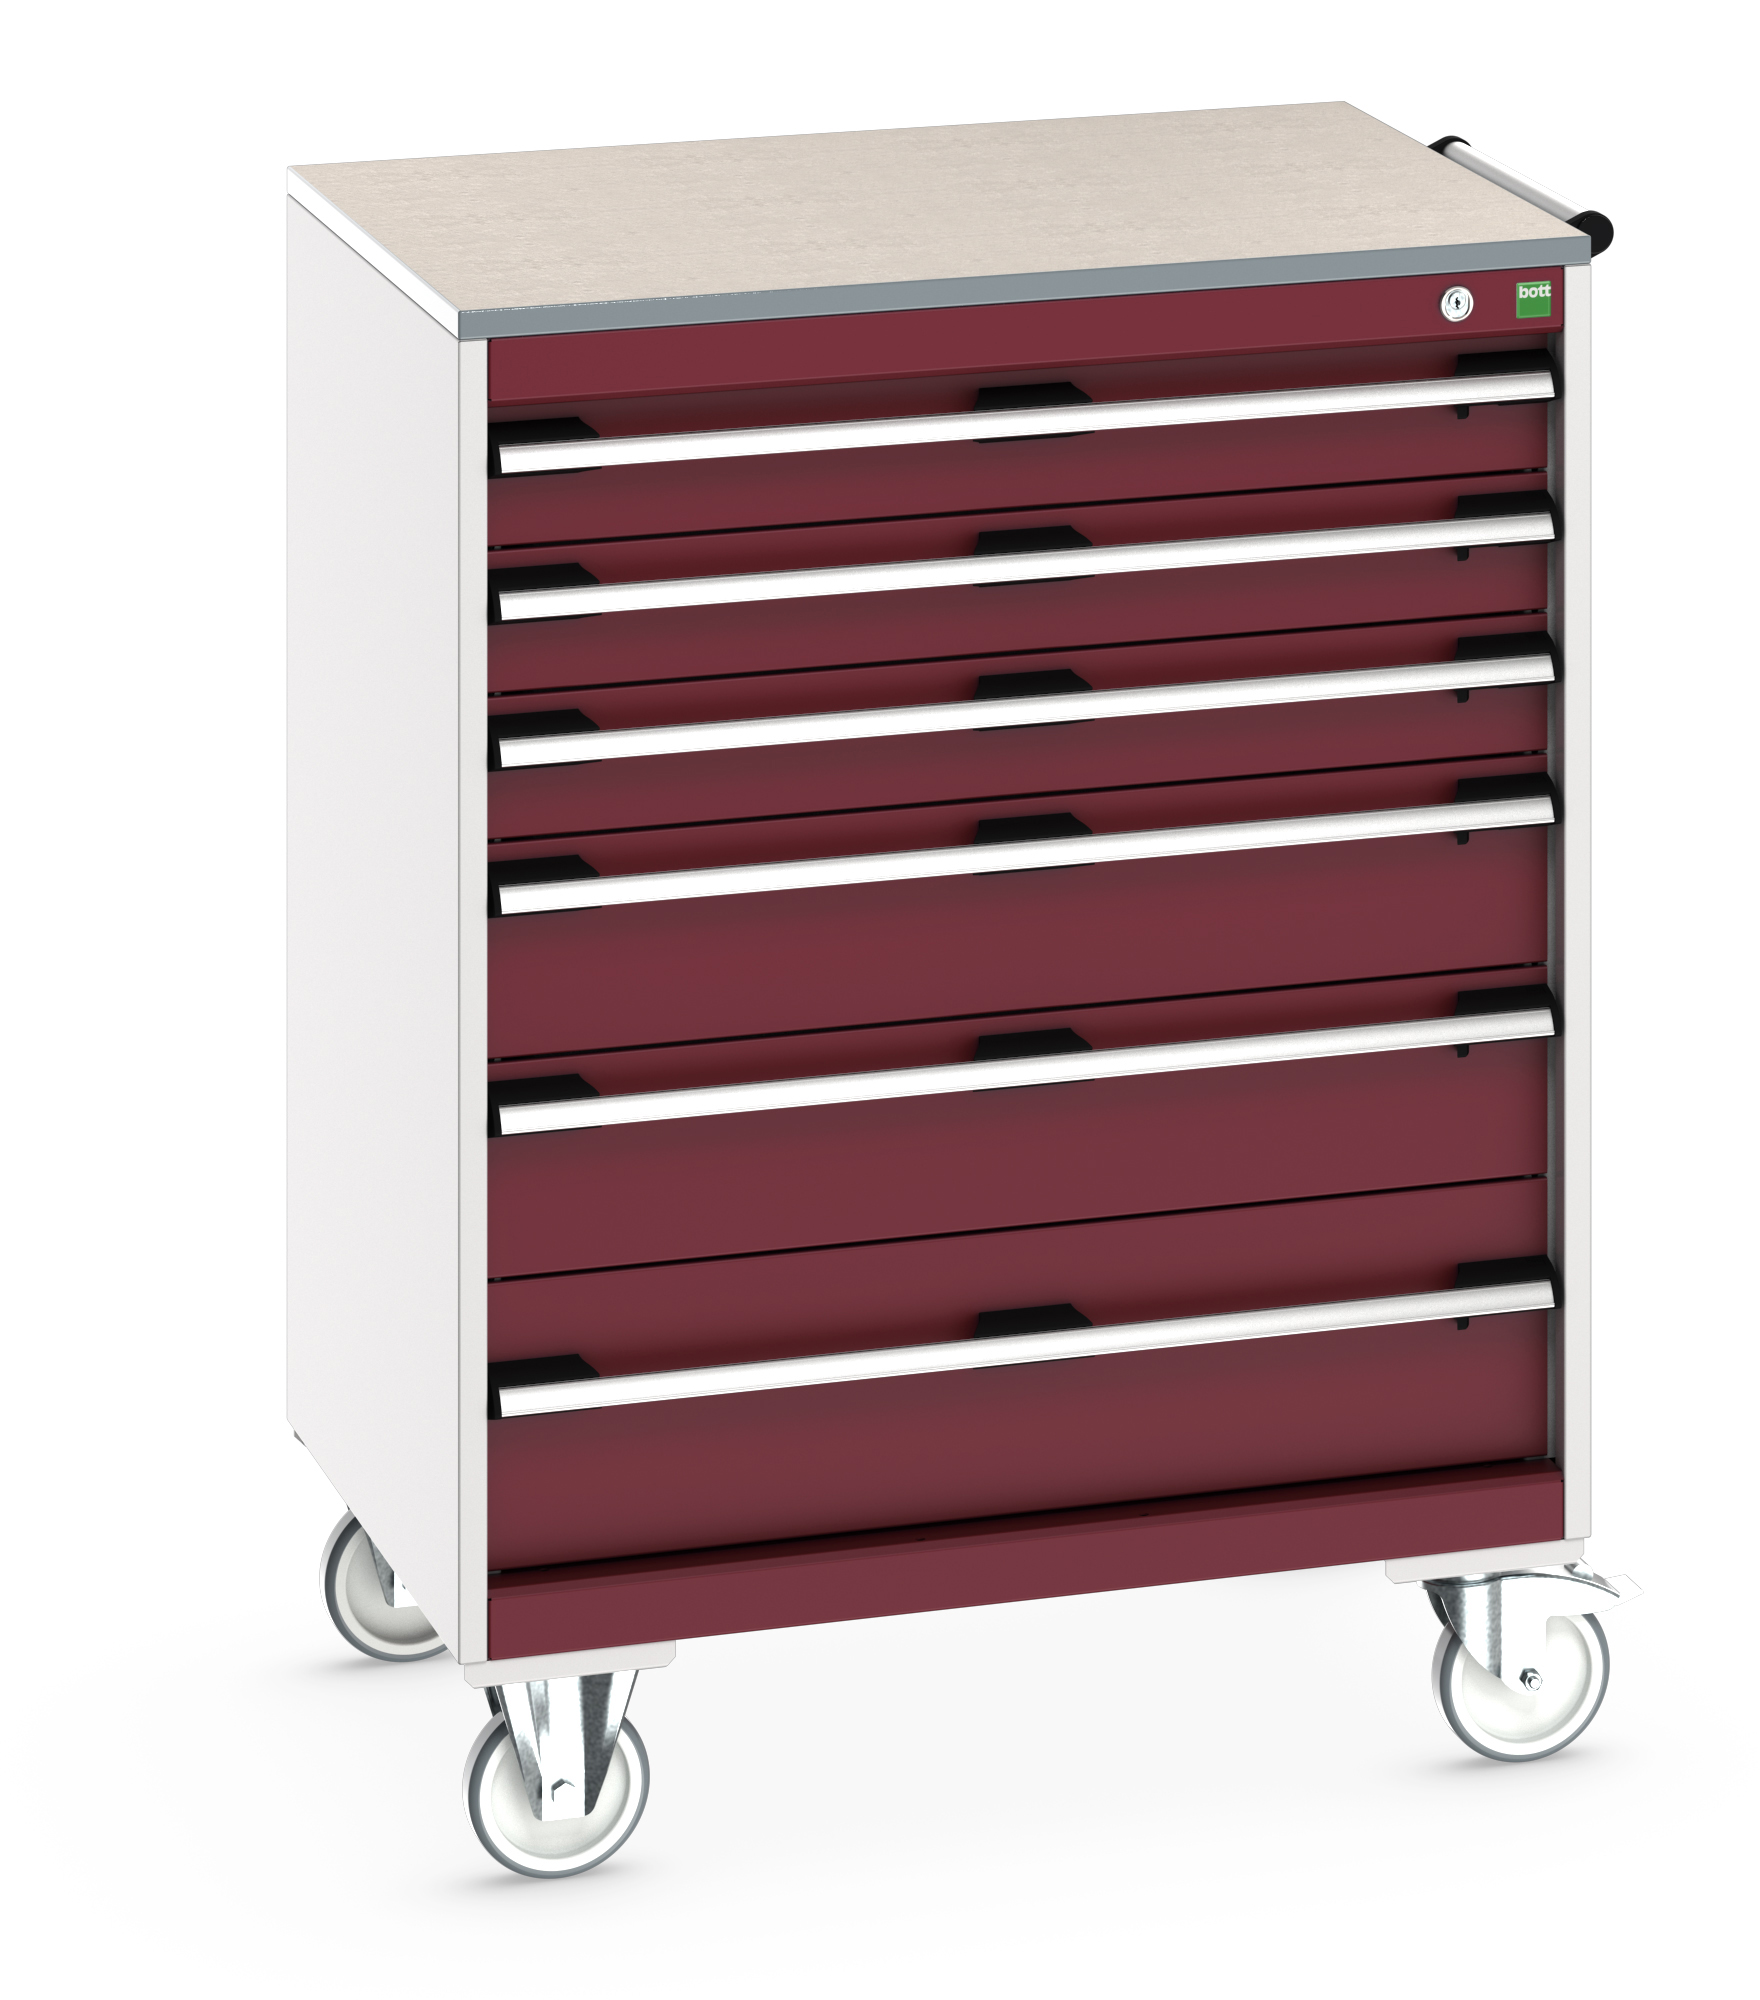 Bott Cubio Mobile Drawer Cabinet With 6 Drawers & Lino Worktop - 40402160.24V